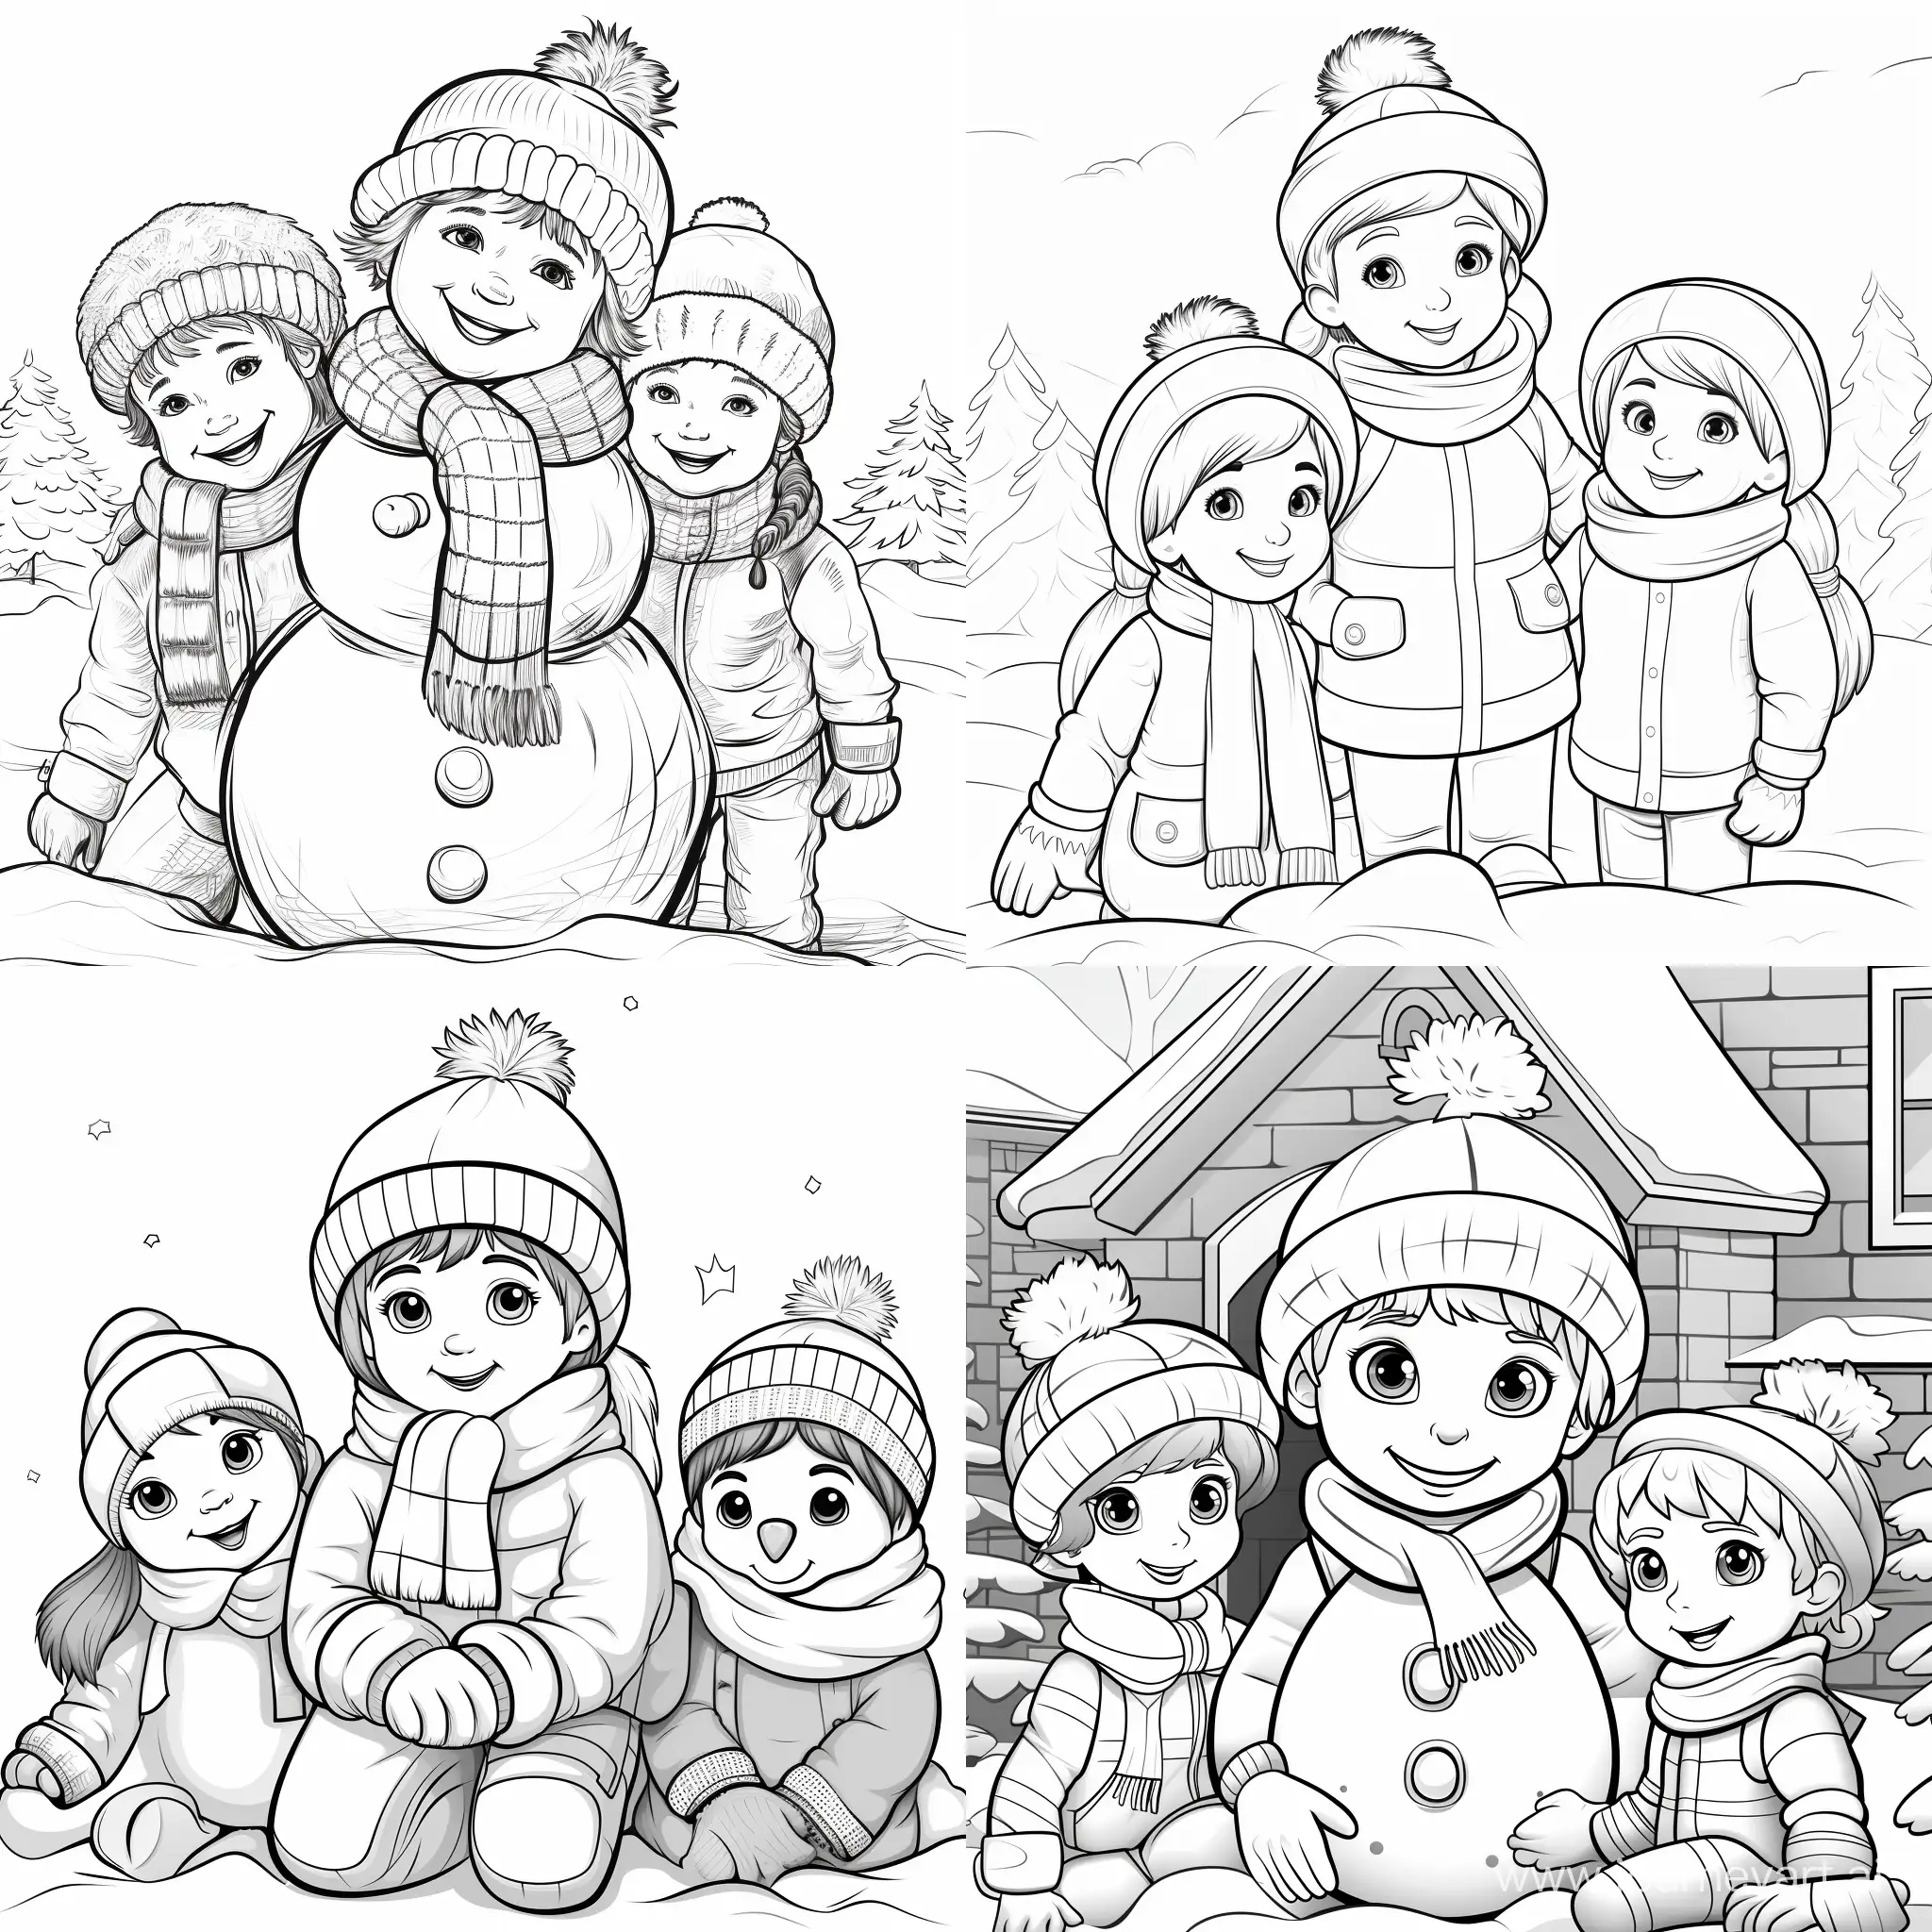 Children-Making-a-Snowman-Coloring-Page